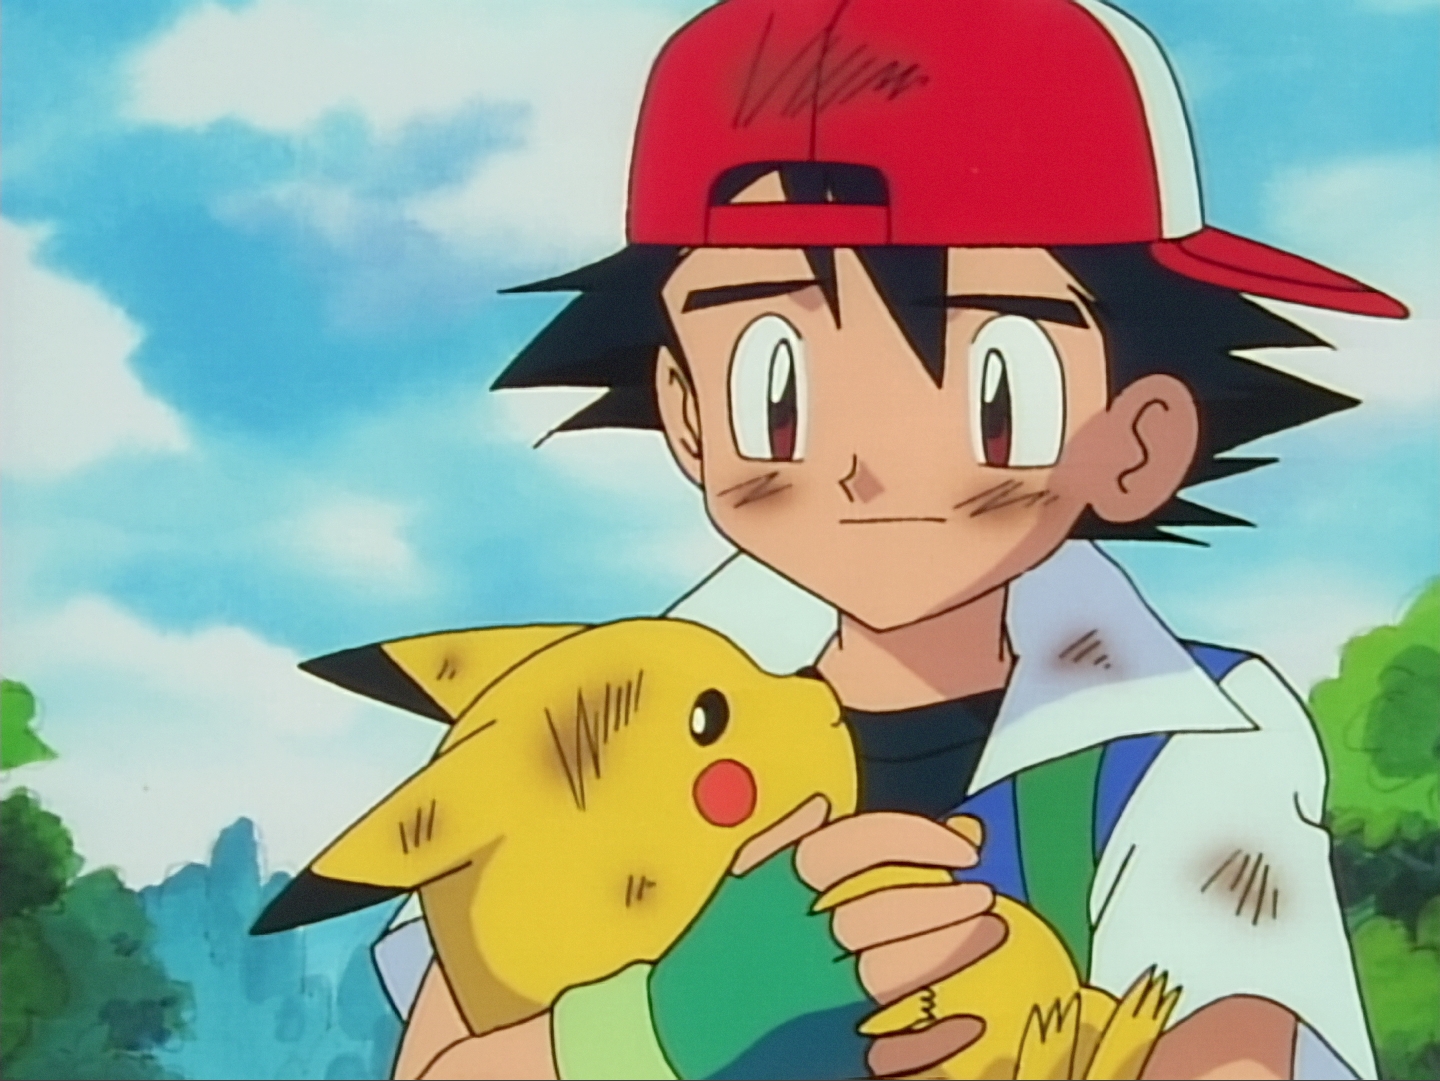 Here’s Ash and Pikachu from the very first episode, which aired in Japan on April 1, 1997. Do you feel old yet? (Picture: The Pokémon Company)